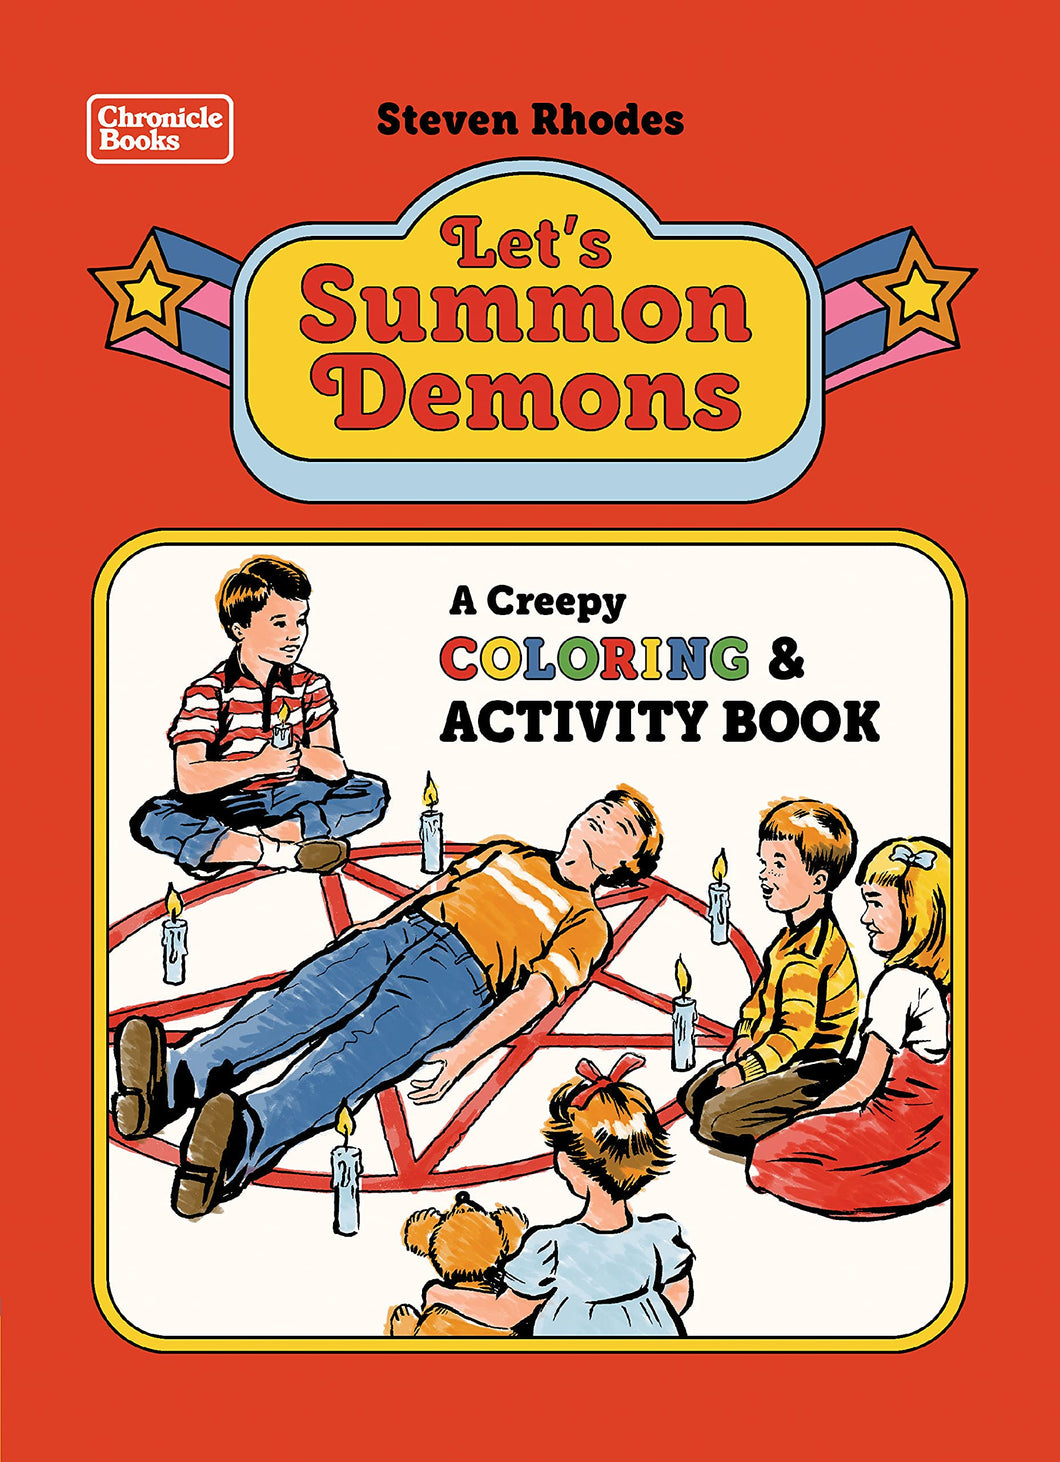 Let's Summon Demons: A Creepy Coloring and Activity Book [Steven Rhodes]